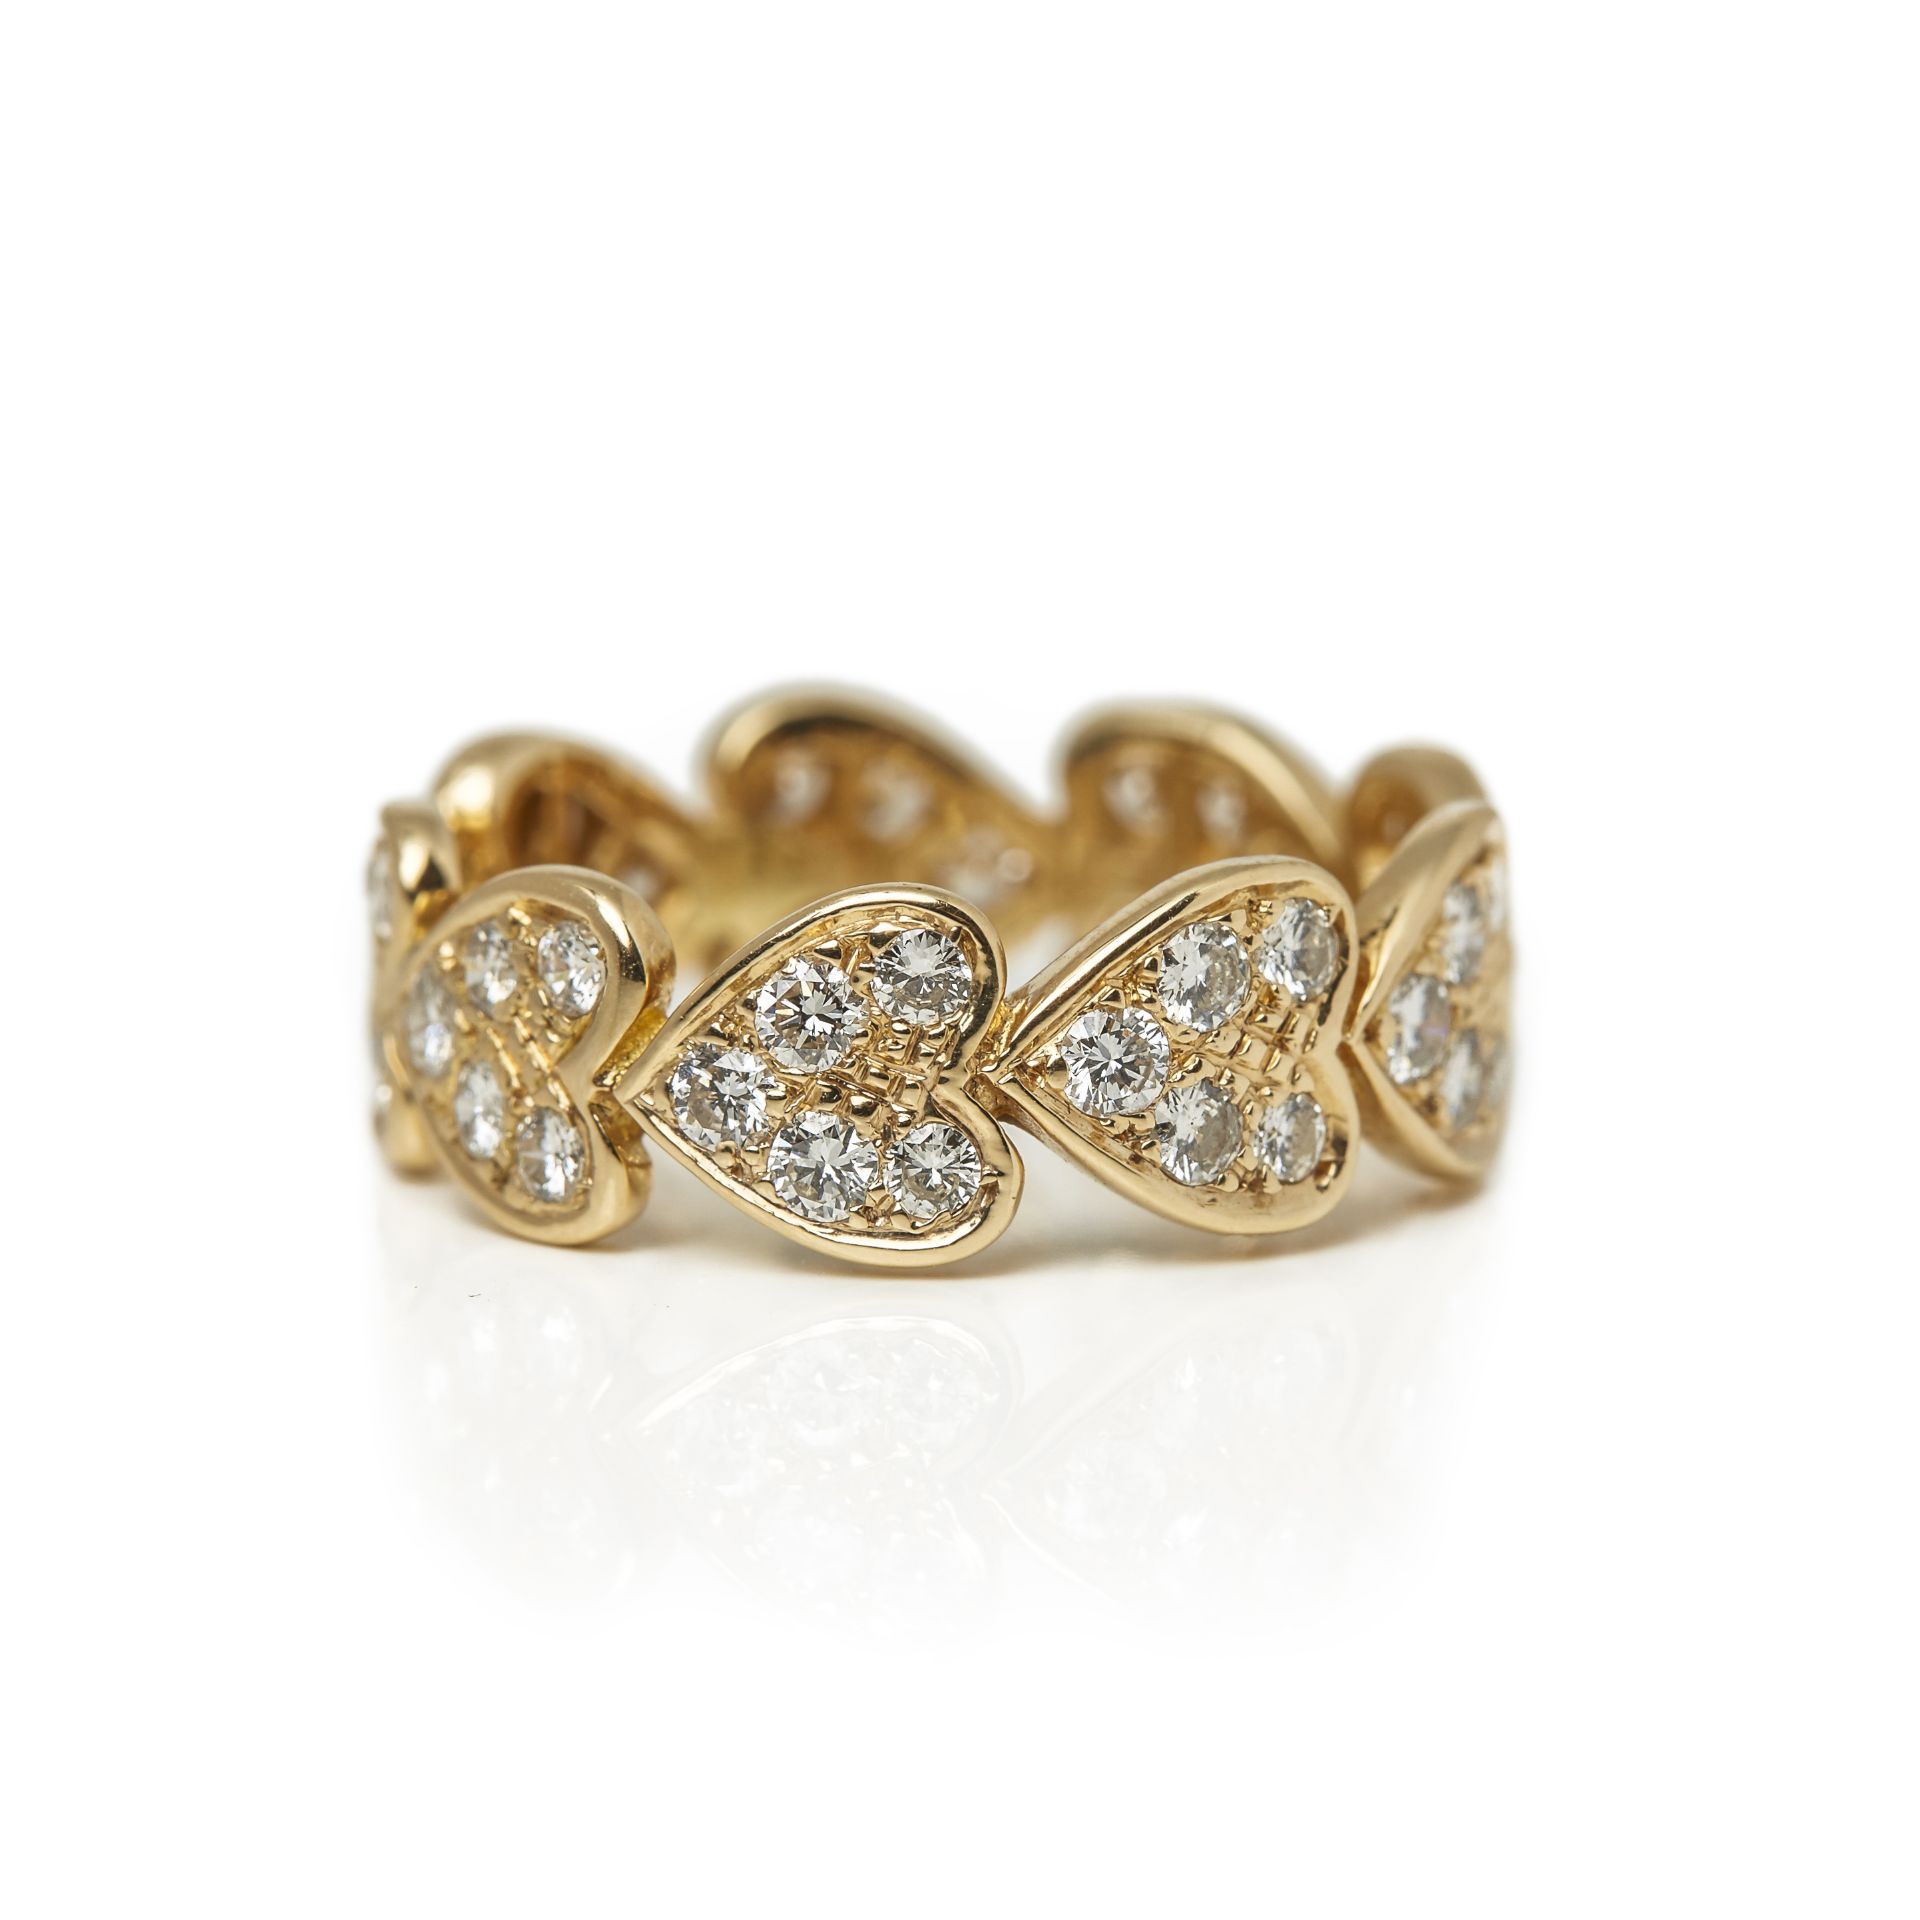 Cartier 18k Yellow Gold Diamond Heart Ring - Image 12 of 23